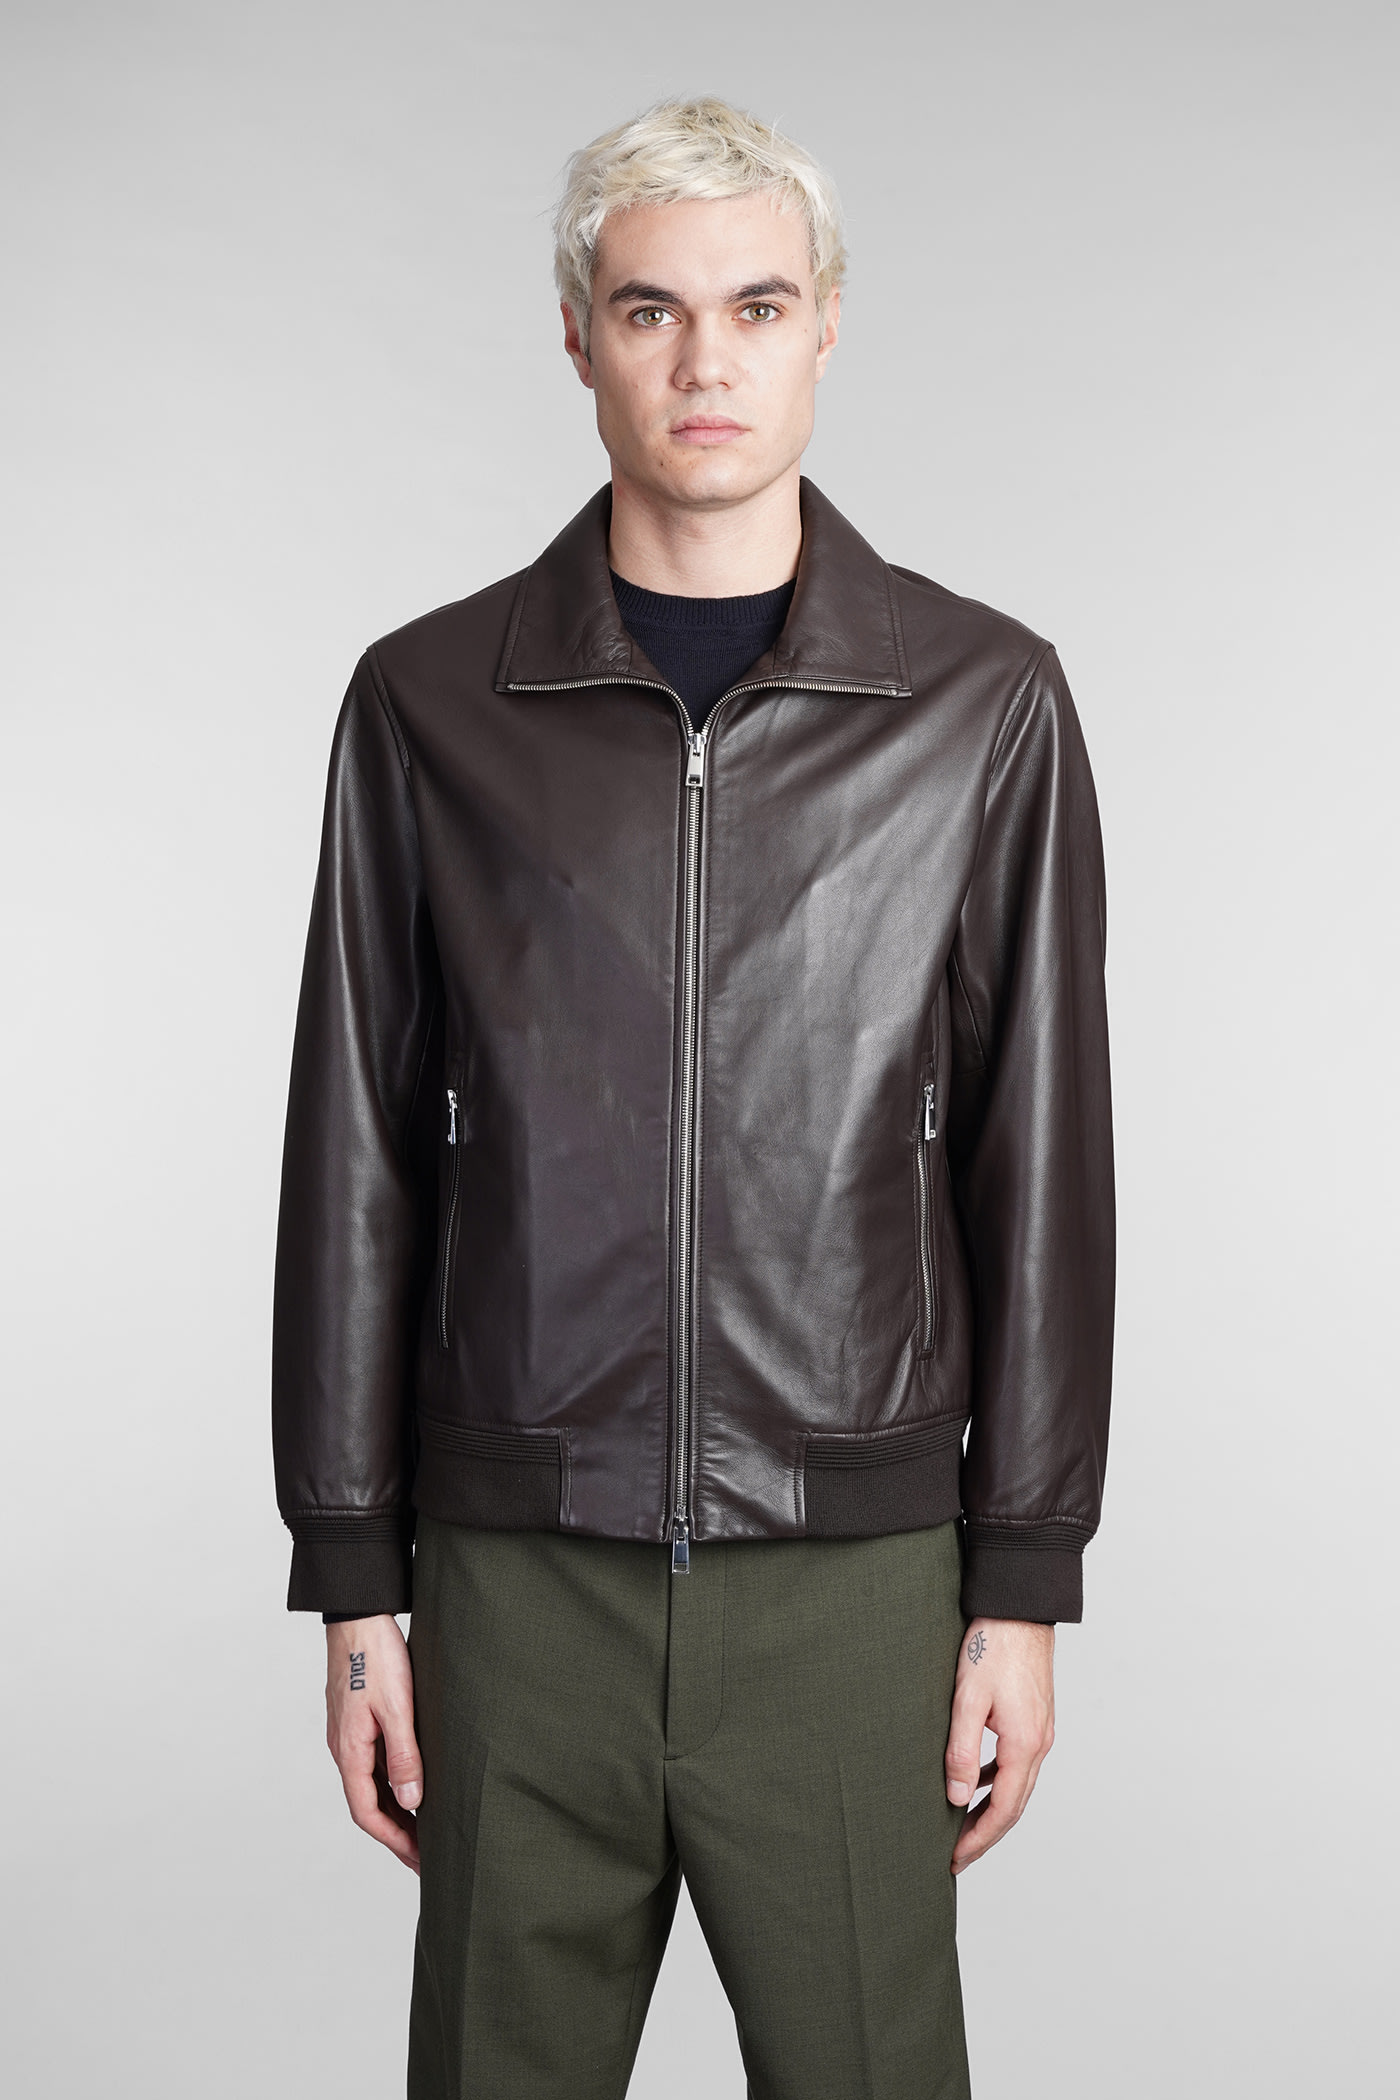 THEORY LEATHER JACKET IN BROWN LEATHER